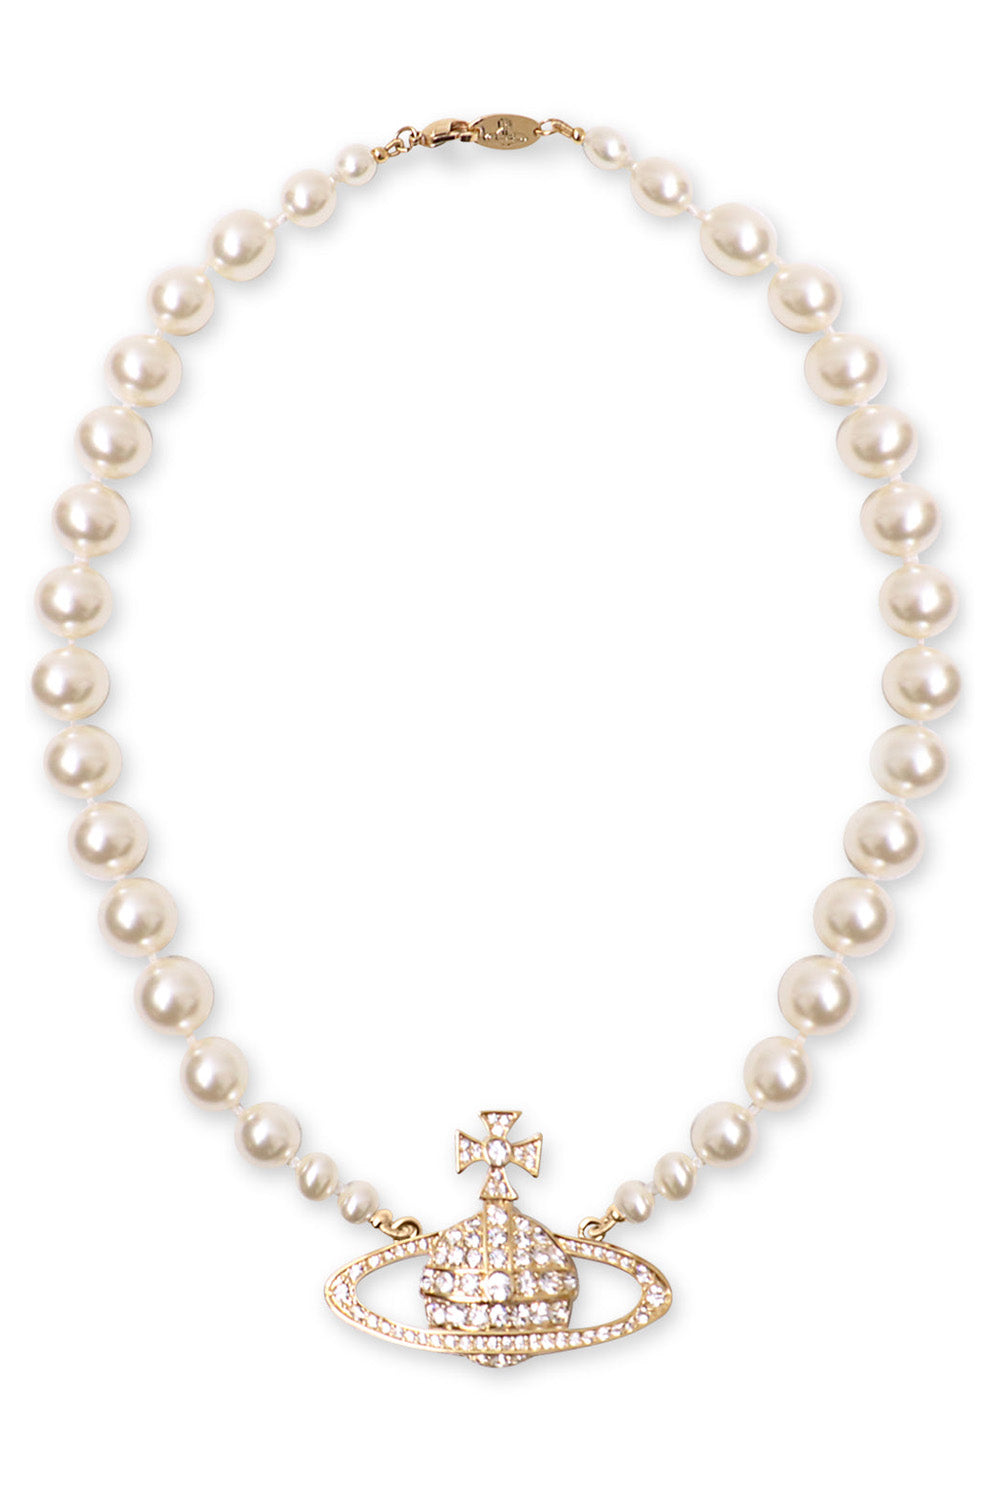 VIVIENNE WESTWOOD ACCESSORIES GOLD PEARL BAS RELIEF CHOKER | GOLD